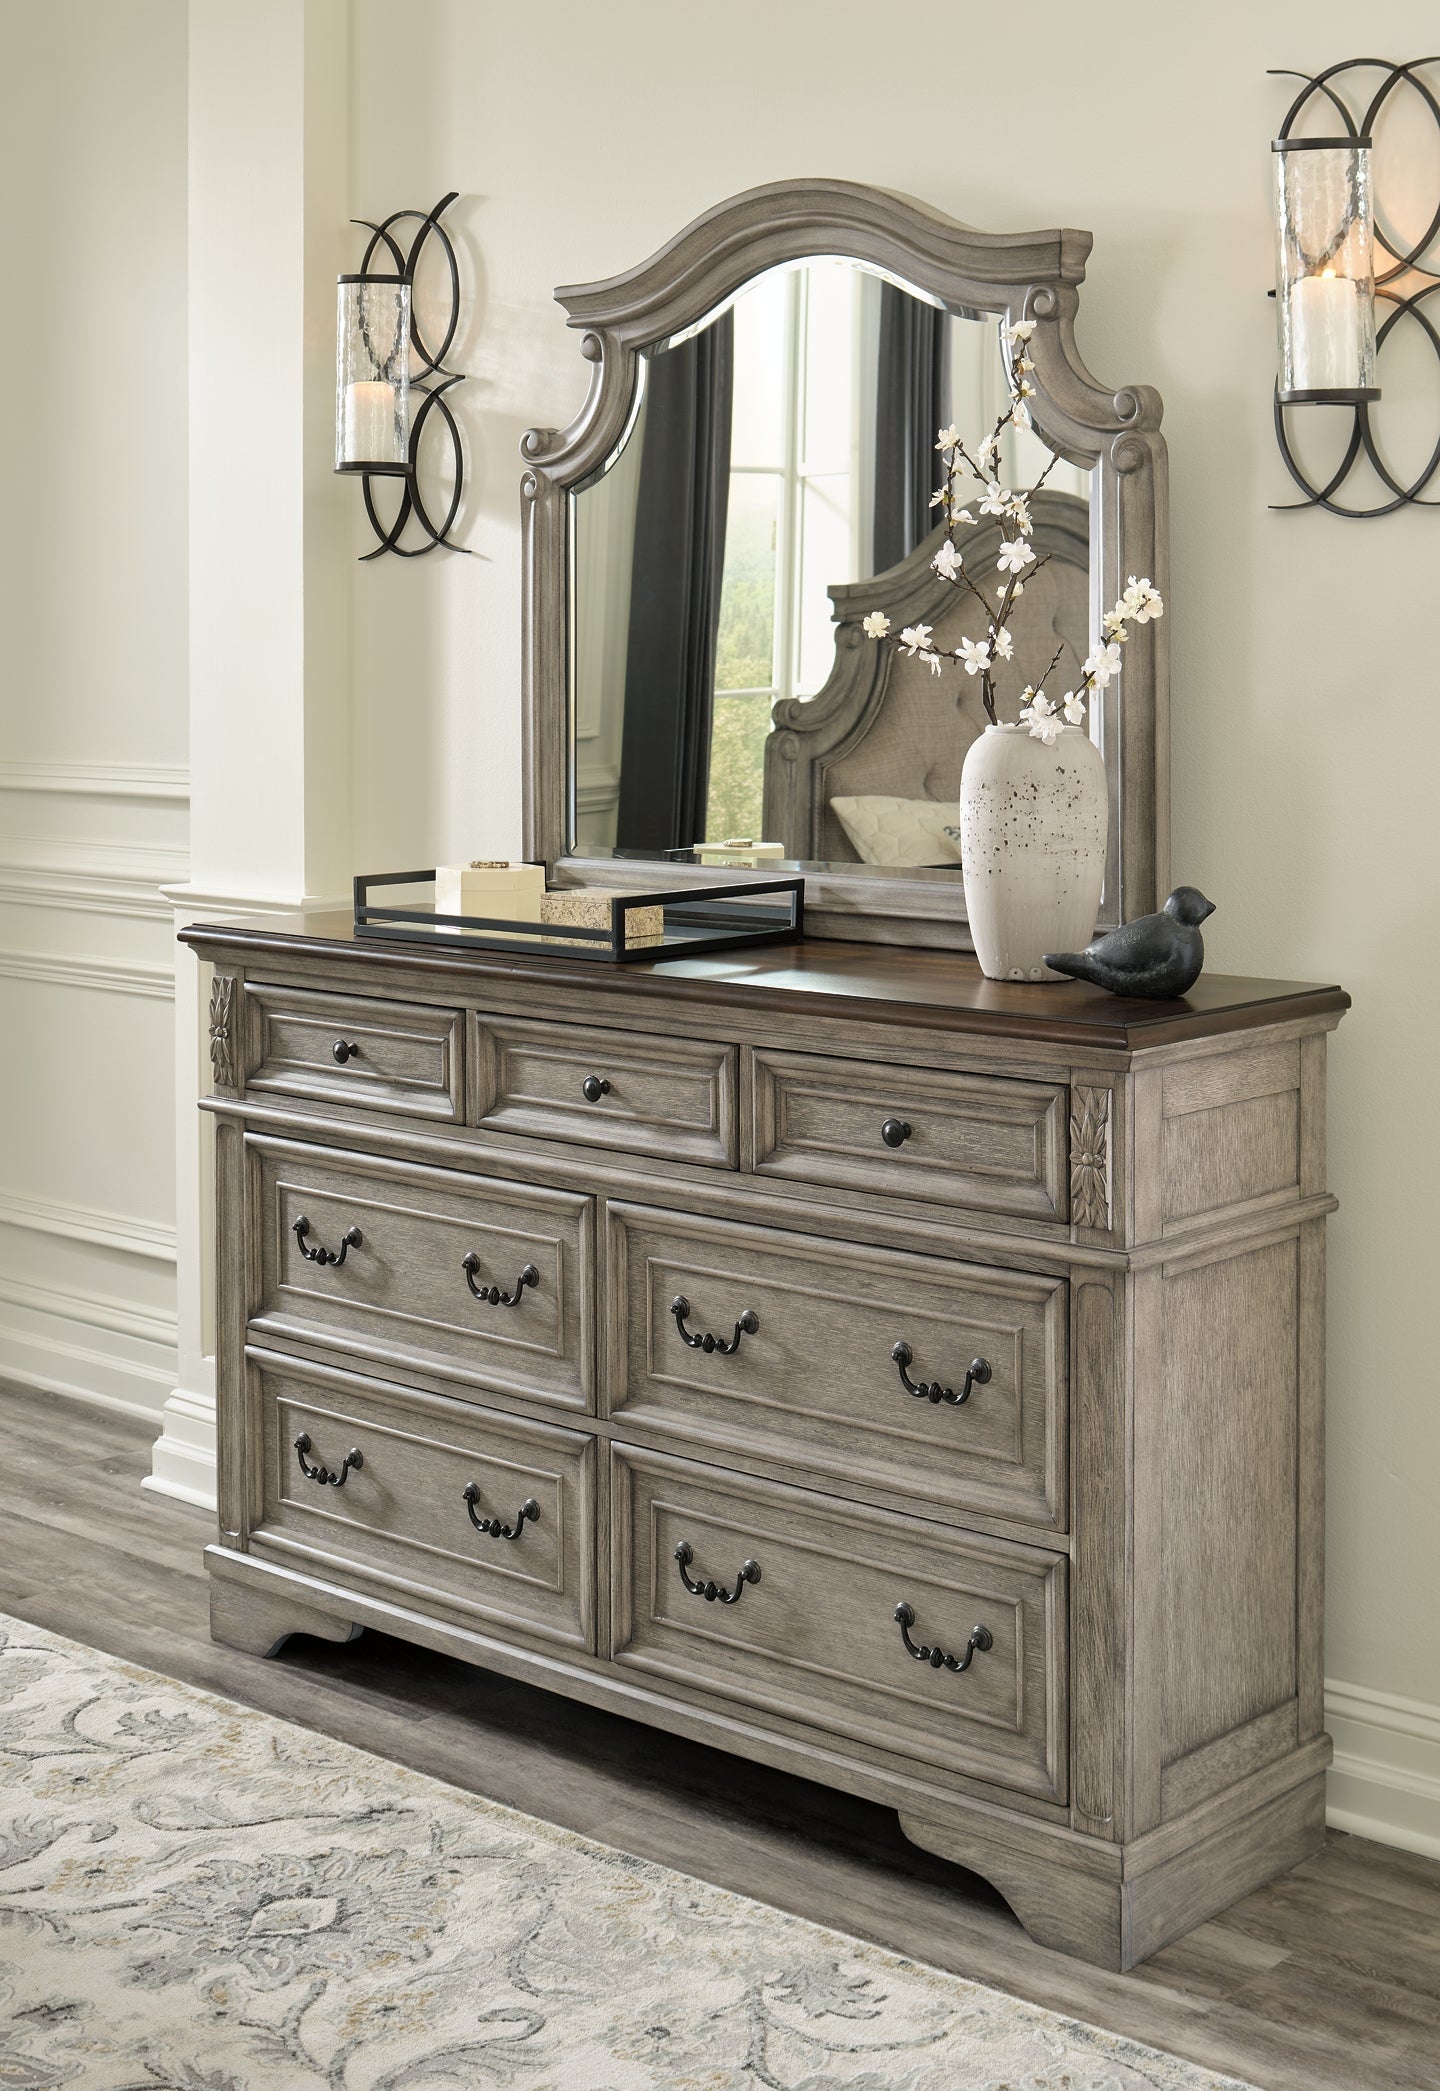 Lodenbay California King Panel Bed with Mirrored Dresser Smyrna Furniture Outlet